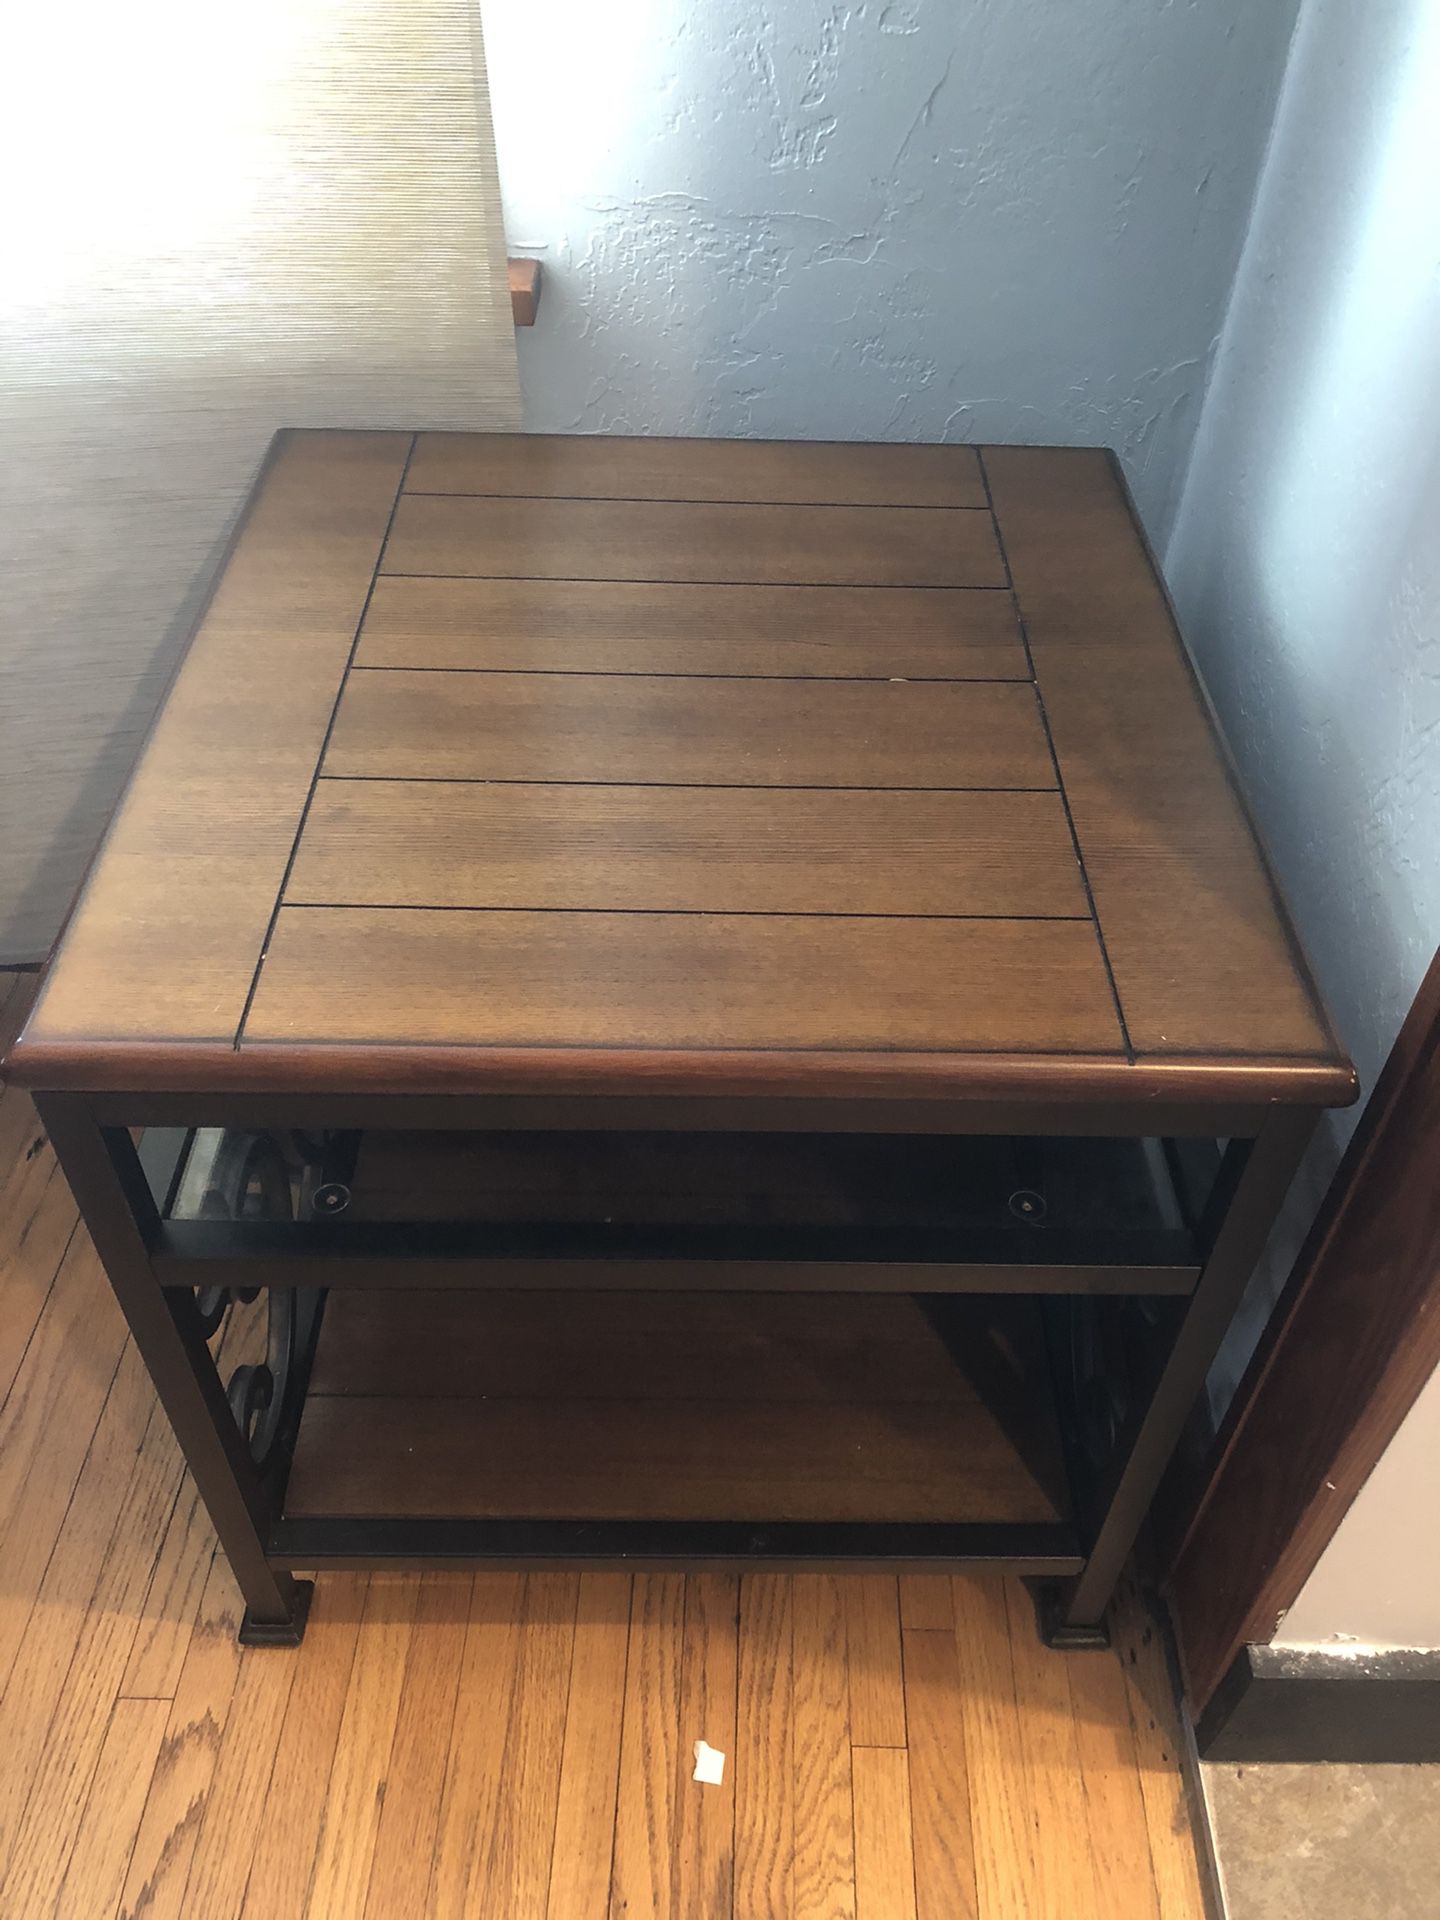 Matching End Table & Coffee Table